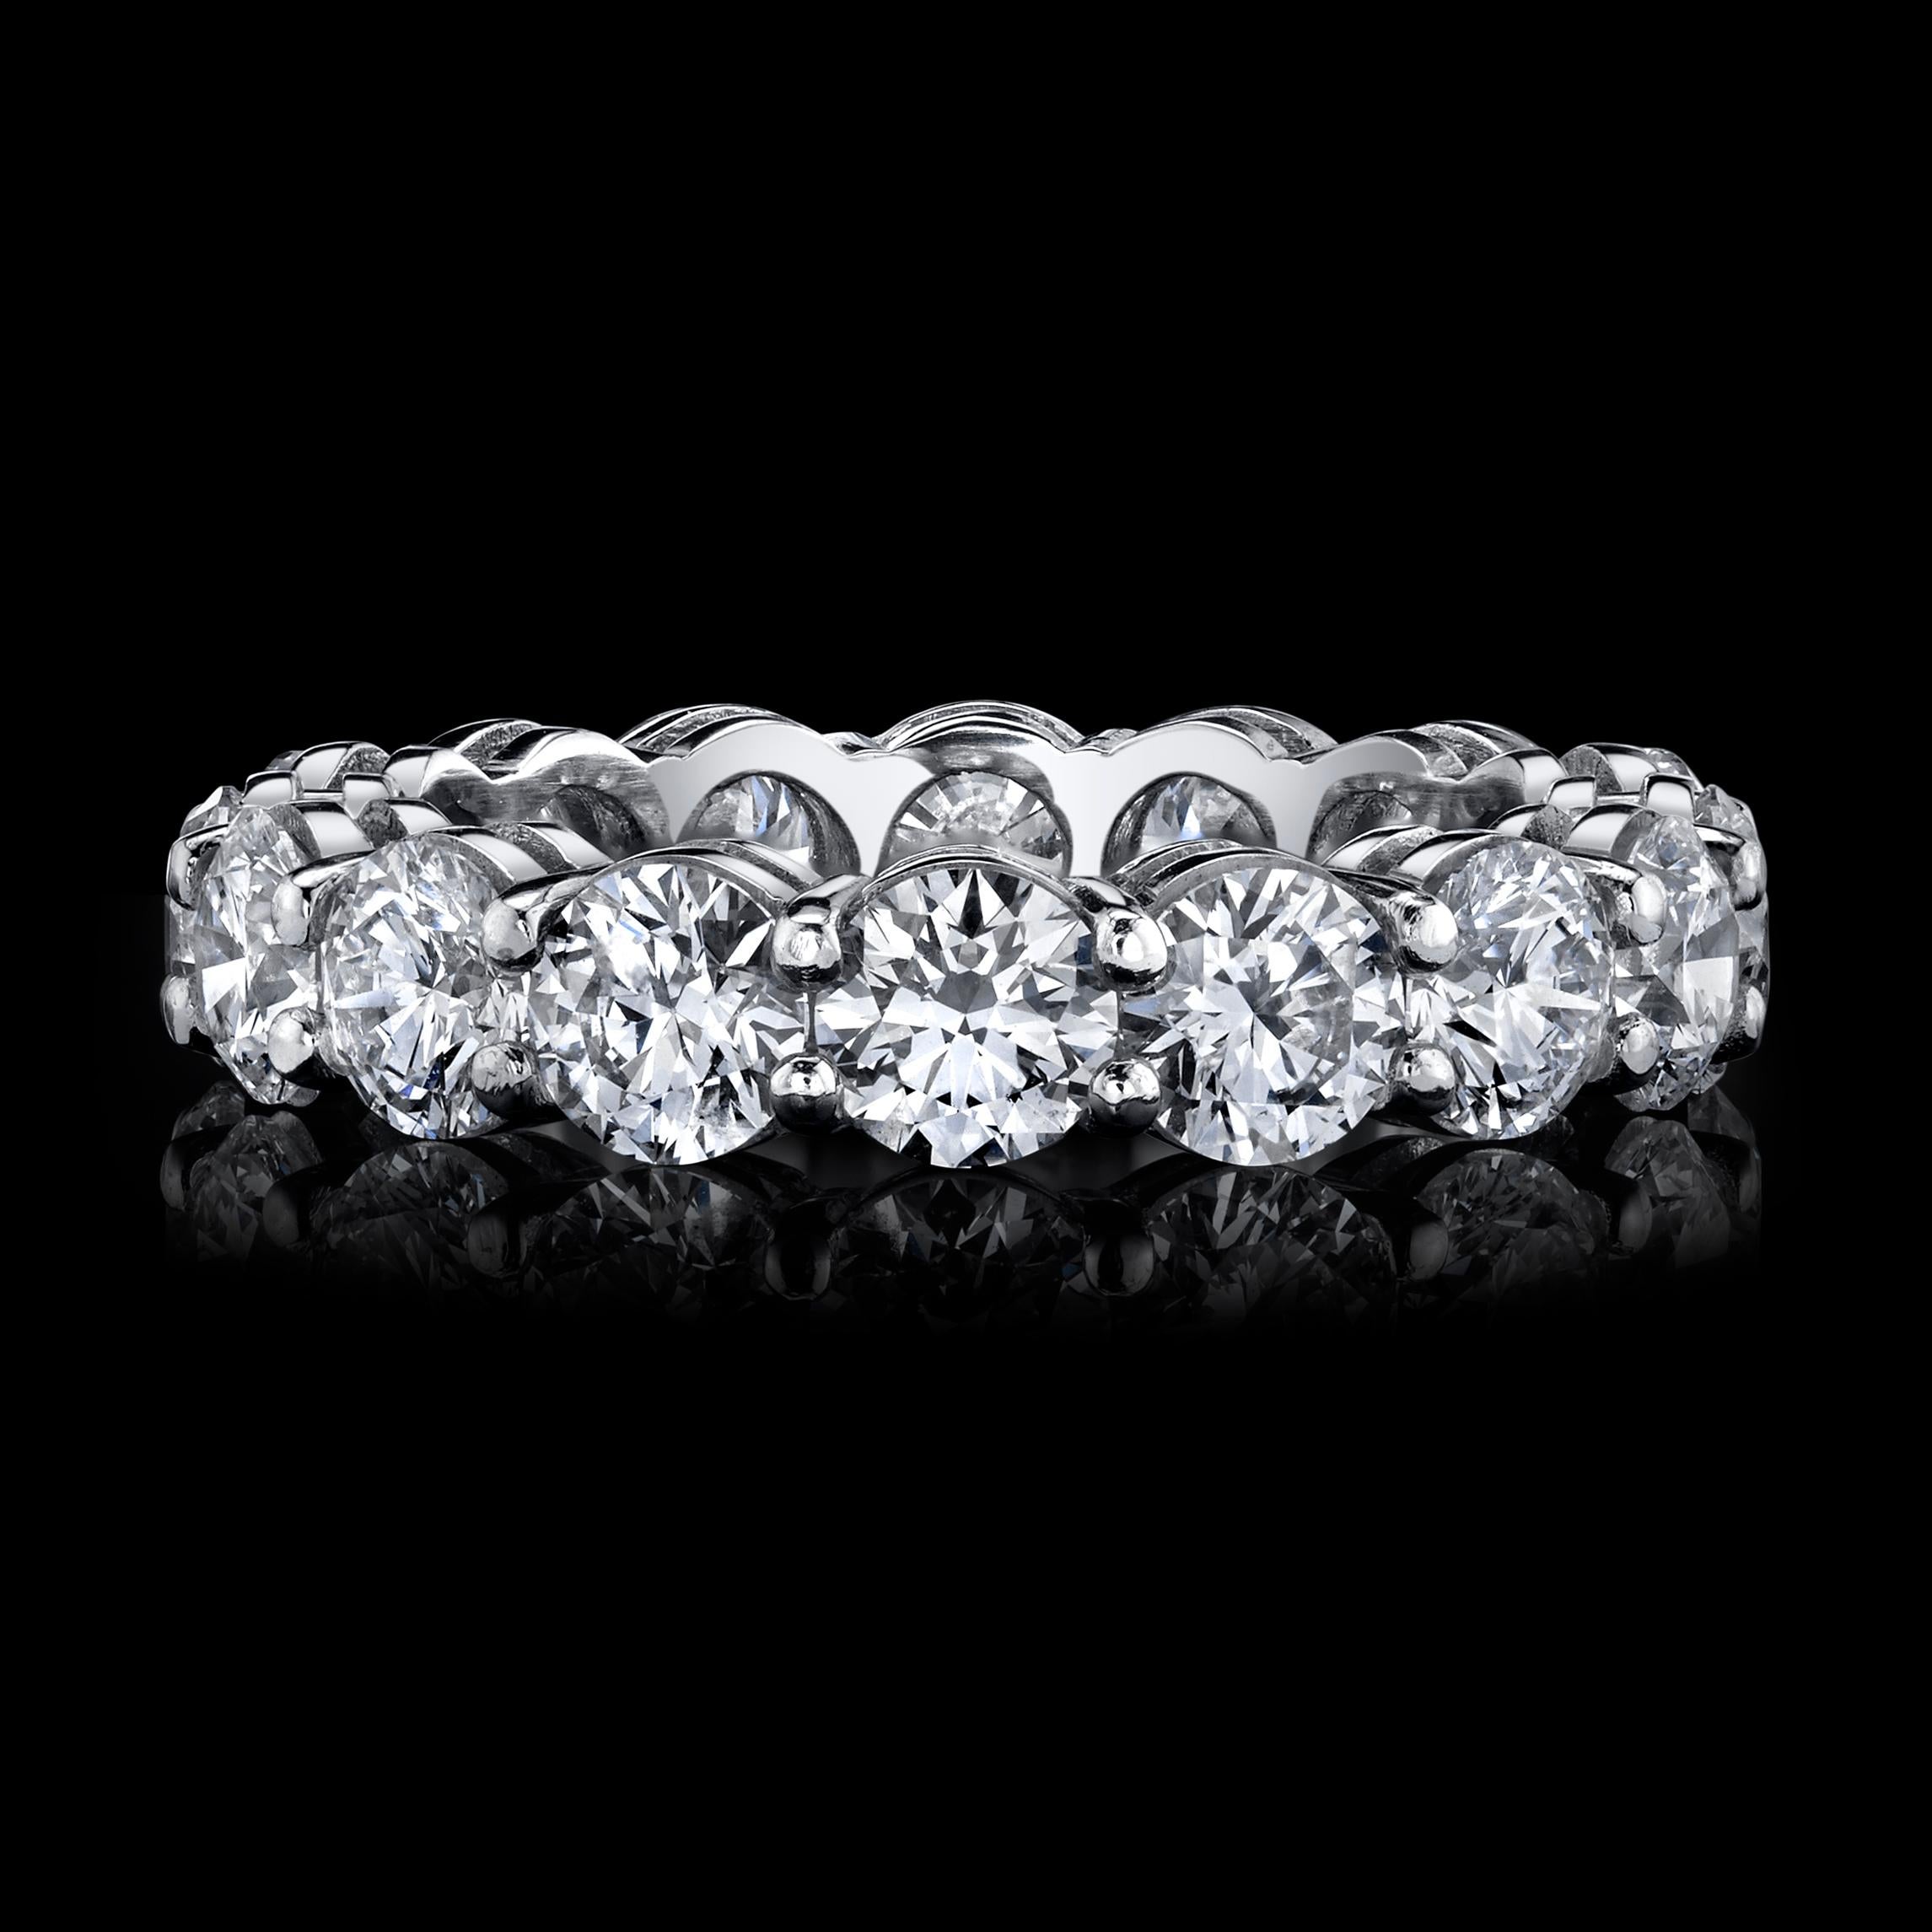 DIAMOND ETERNITY BAND RING SET IN PLATINUM

Round Diamonds DEF Color, SI1/SI2 Clarity

Each Diamond Weighs 0.30 carat +

With GIA Certificates

Total Carat Weight 4.53 Carats

Set in Platinum

Shipped in a gift box

ITEM DETAILS

    Item Number: